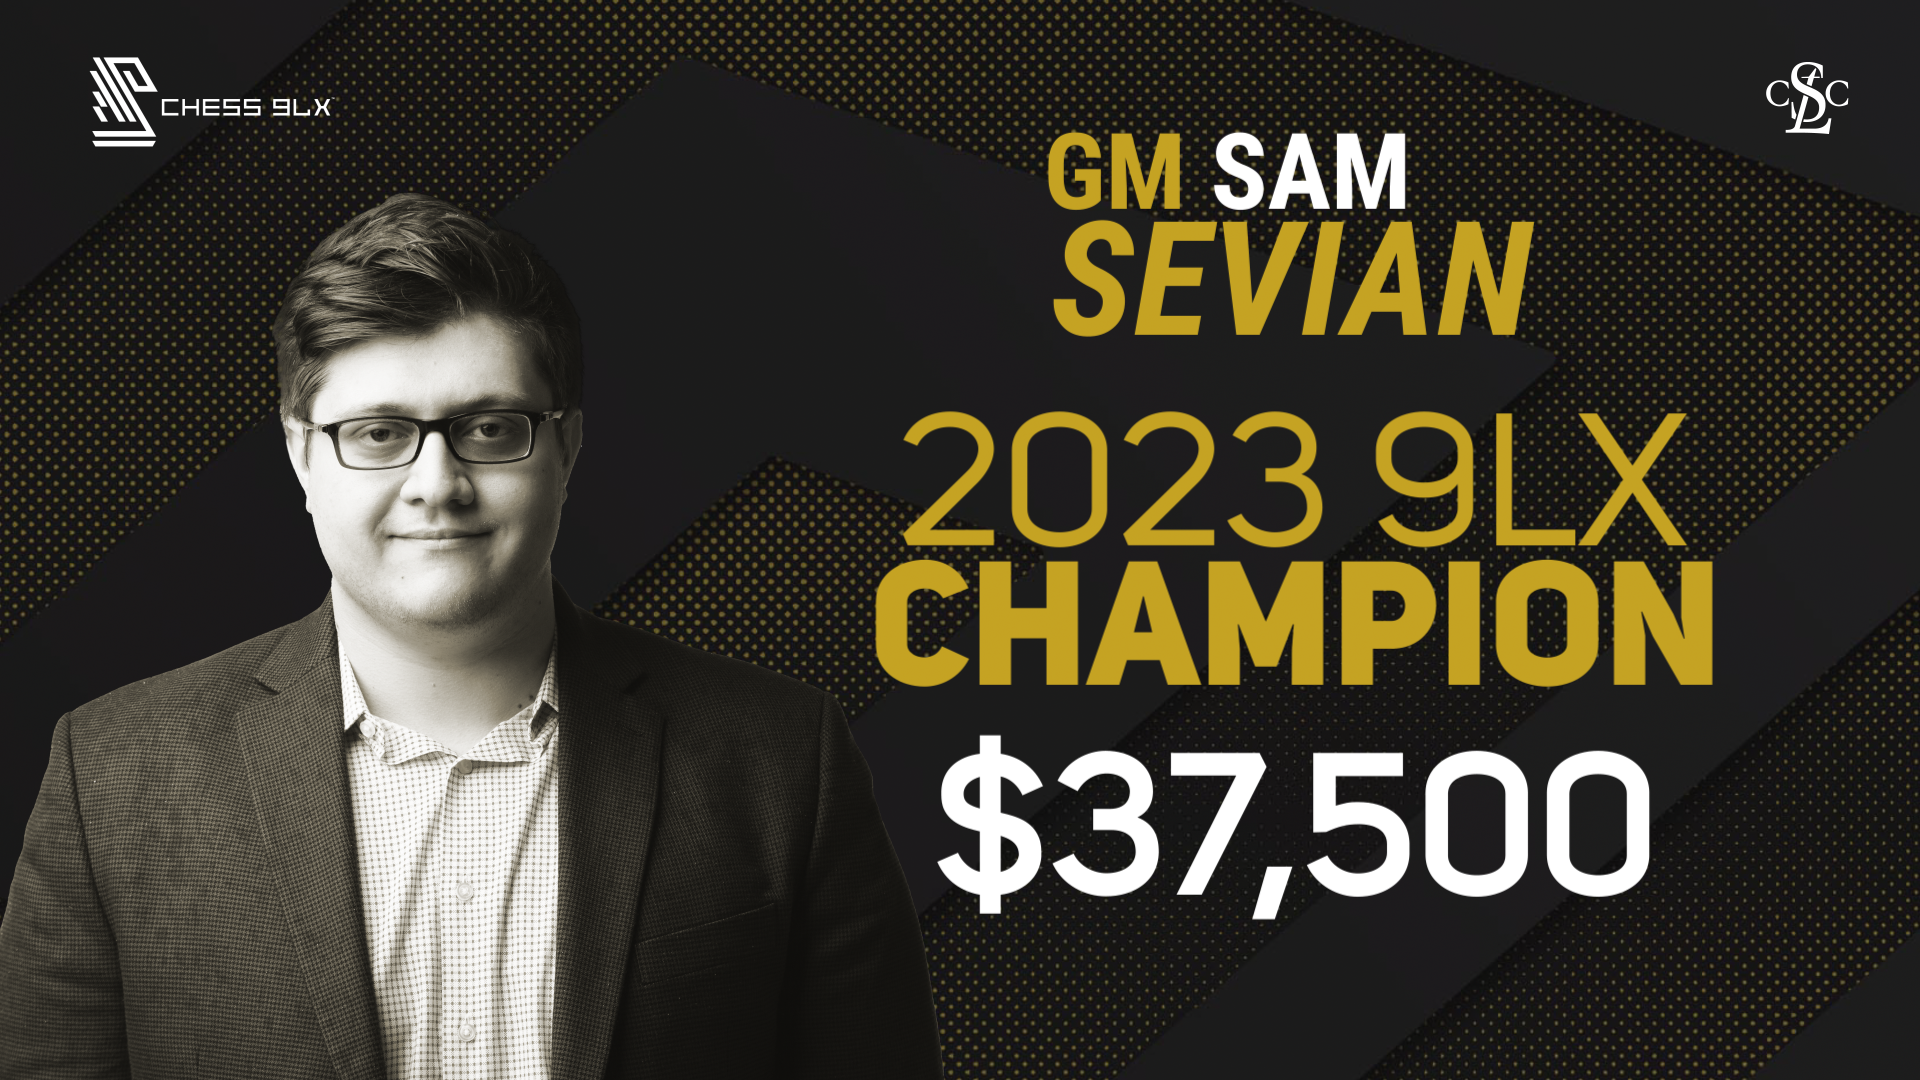 With a draw GM Sam Sevian has just knocked GM Wesley So out of the  Champions Bracket and crosses 2700 FIDE in live rating for the first…